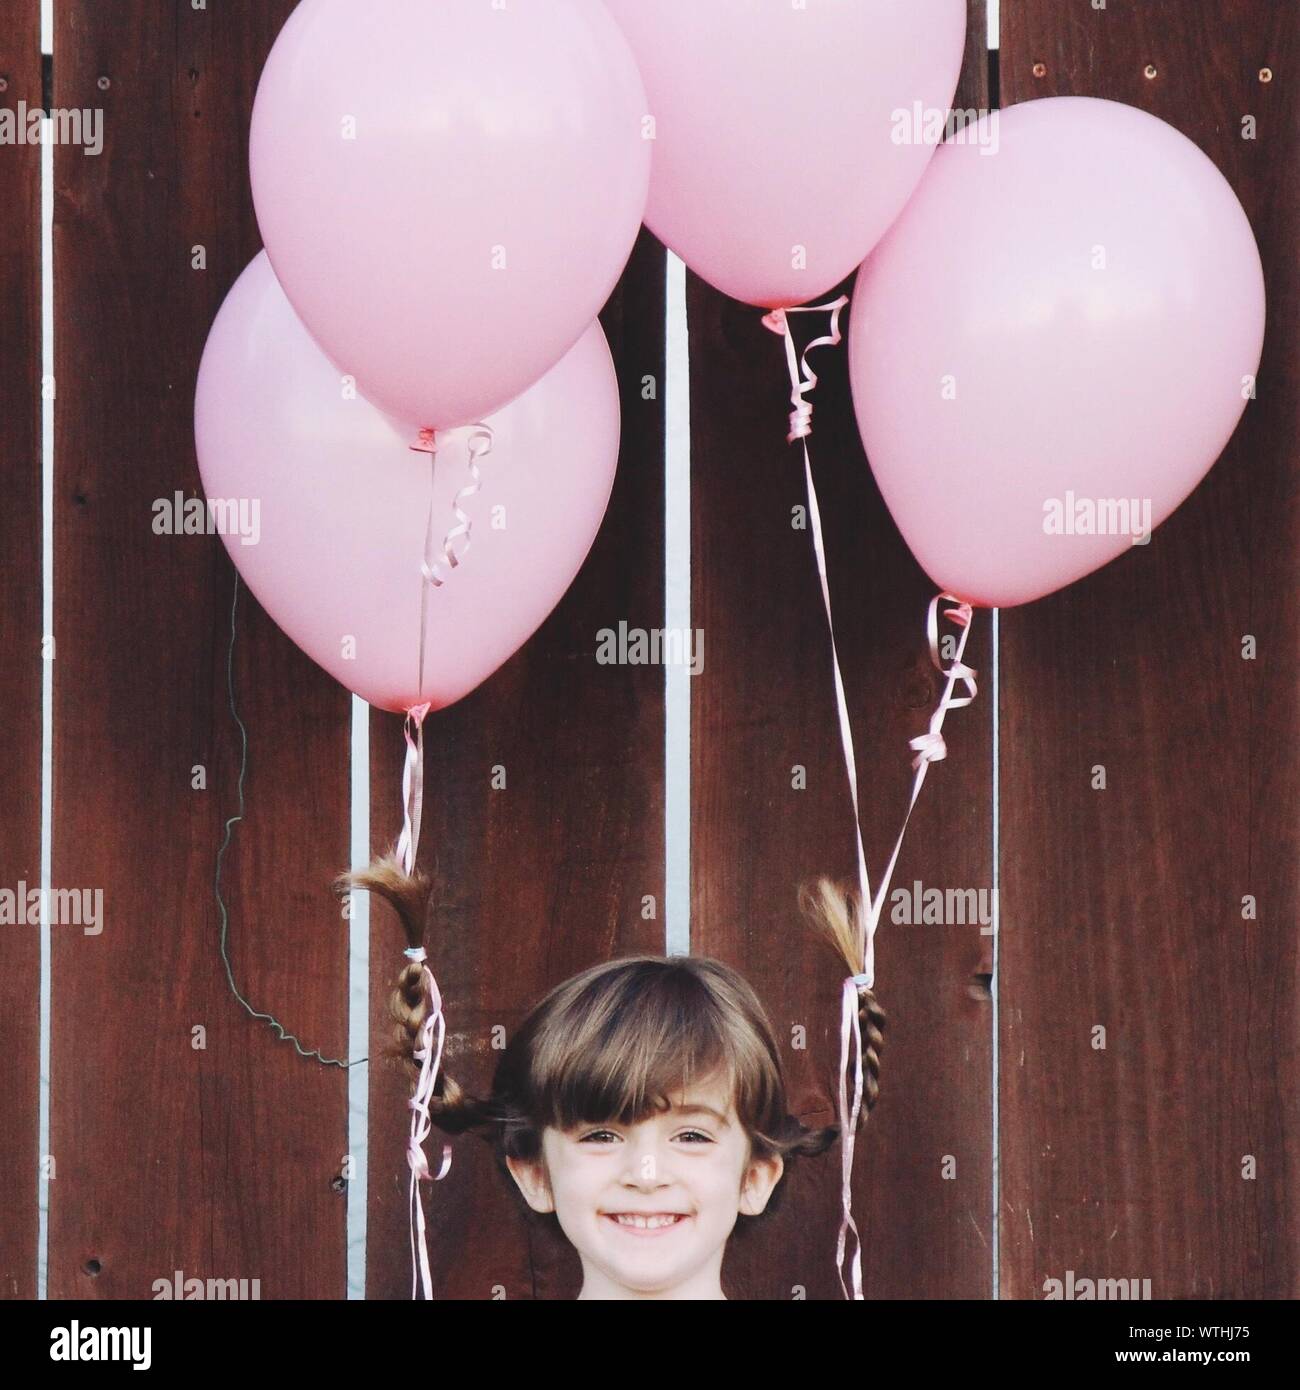 Portrait Of Happy Girl With Pink Helium Balloons Tied On Ponytails Stock Photo